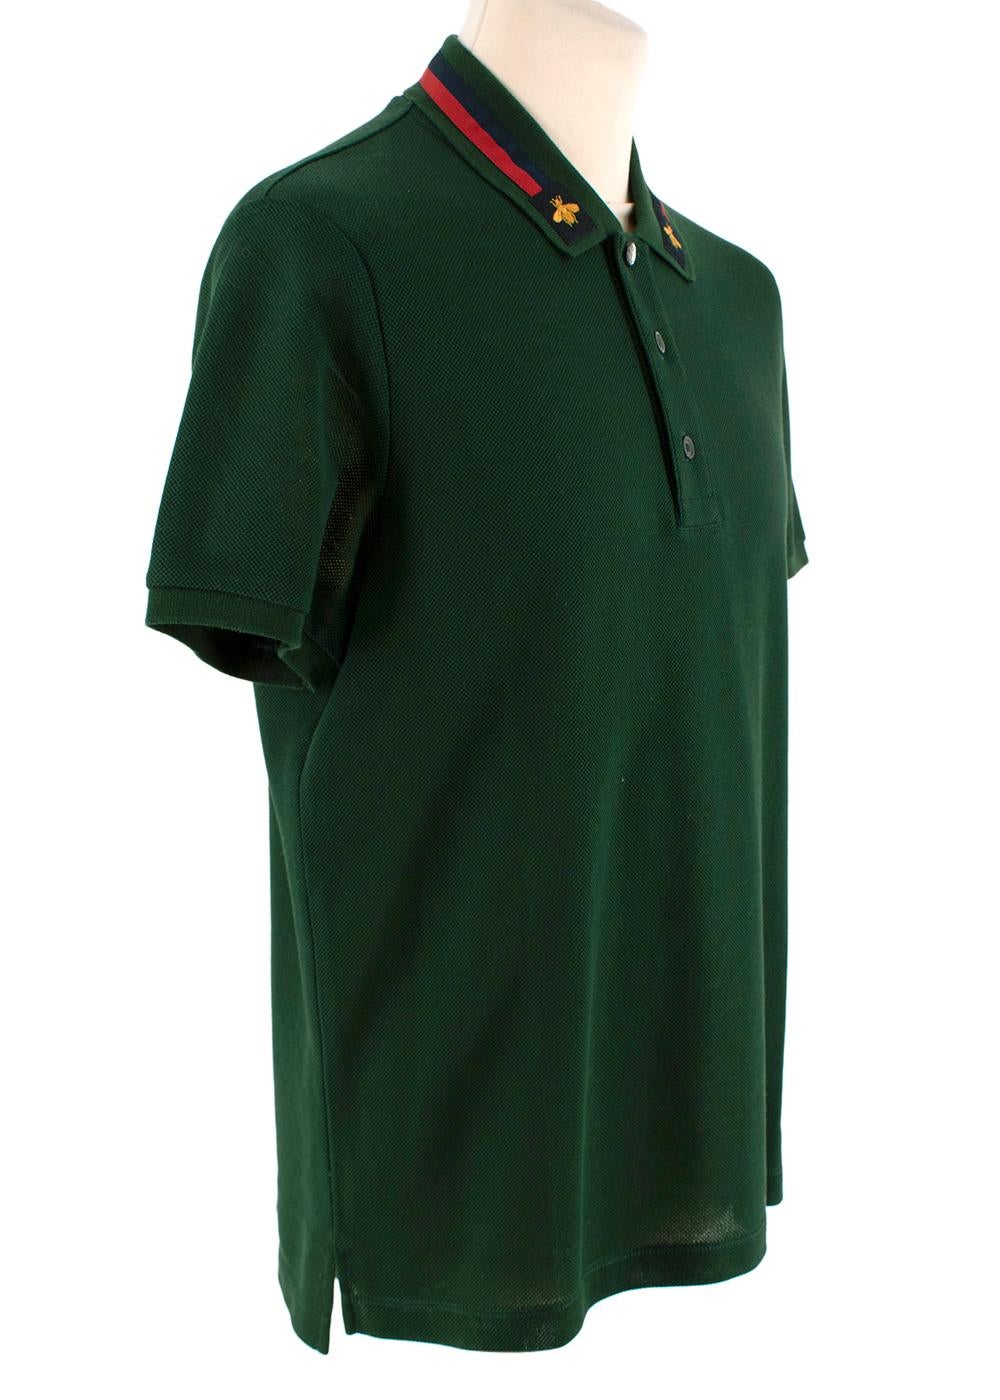 Gucci Forest Green Embellished Collar Cotton Pique Polo Shirt

- Deep green cotton pique
- Embellished classic collar featuring web stripe and bee logo
- 3 button placket
- Short sleeve
- Regular fit

Materials 
93% Cotton 
7% Elastane 

Made in